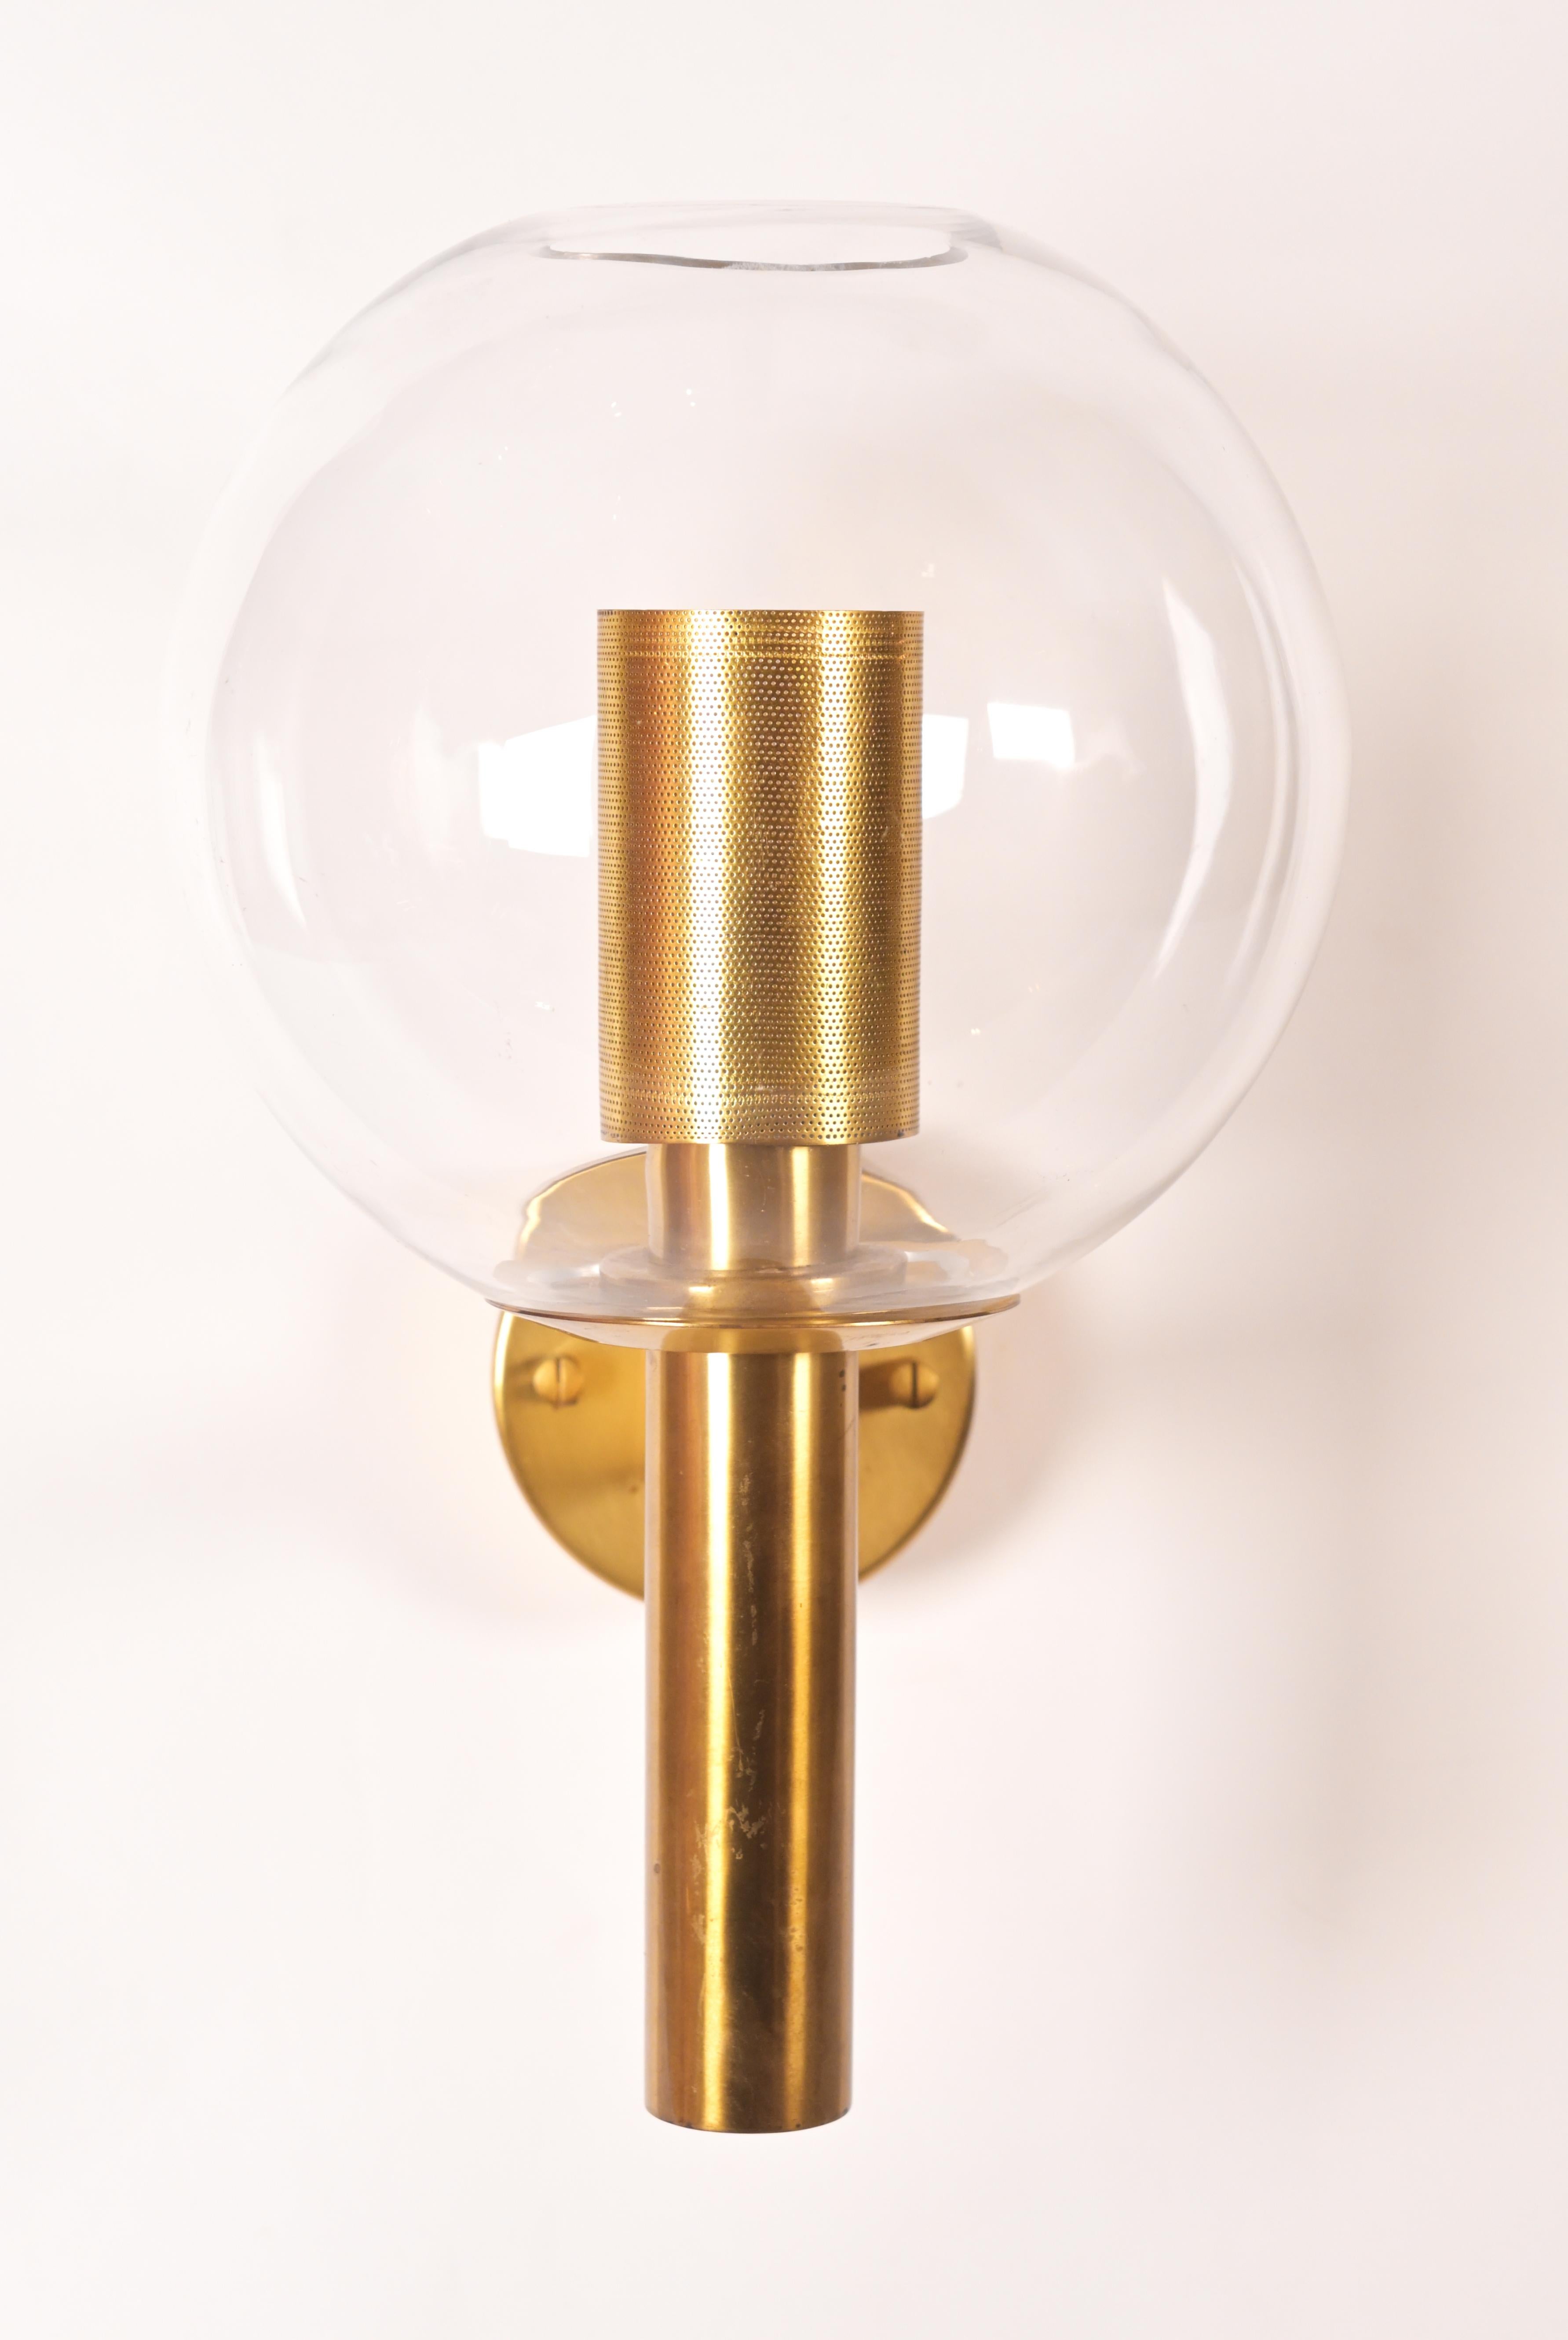 Wall lamps model V-80 by Swedish designer Hans-Agne Jakobsson (1919-2009) having simplistic brass framing with spherical glass shade. 3 are available. UL wiring included in pricing.